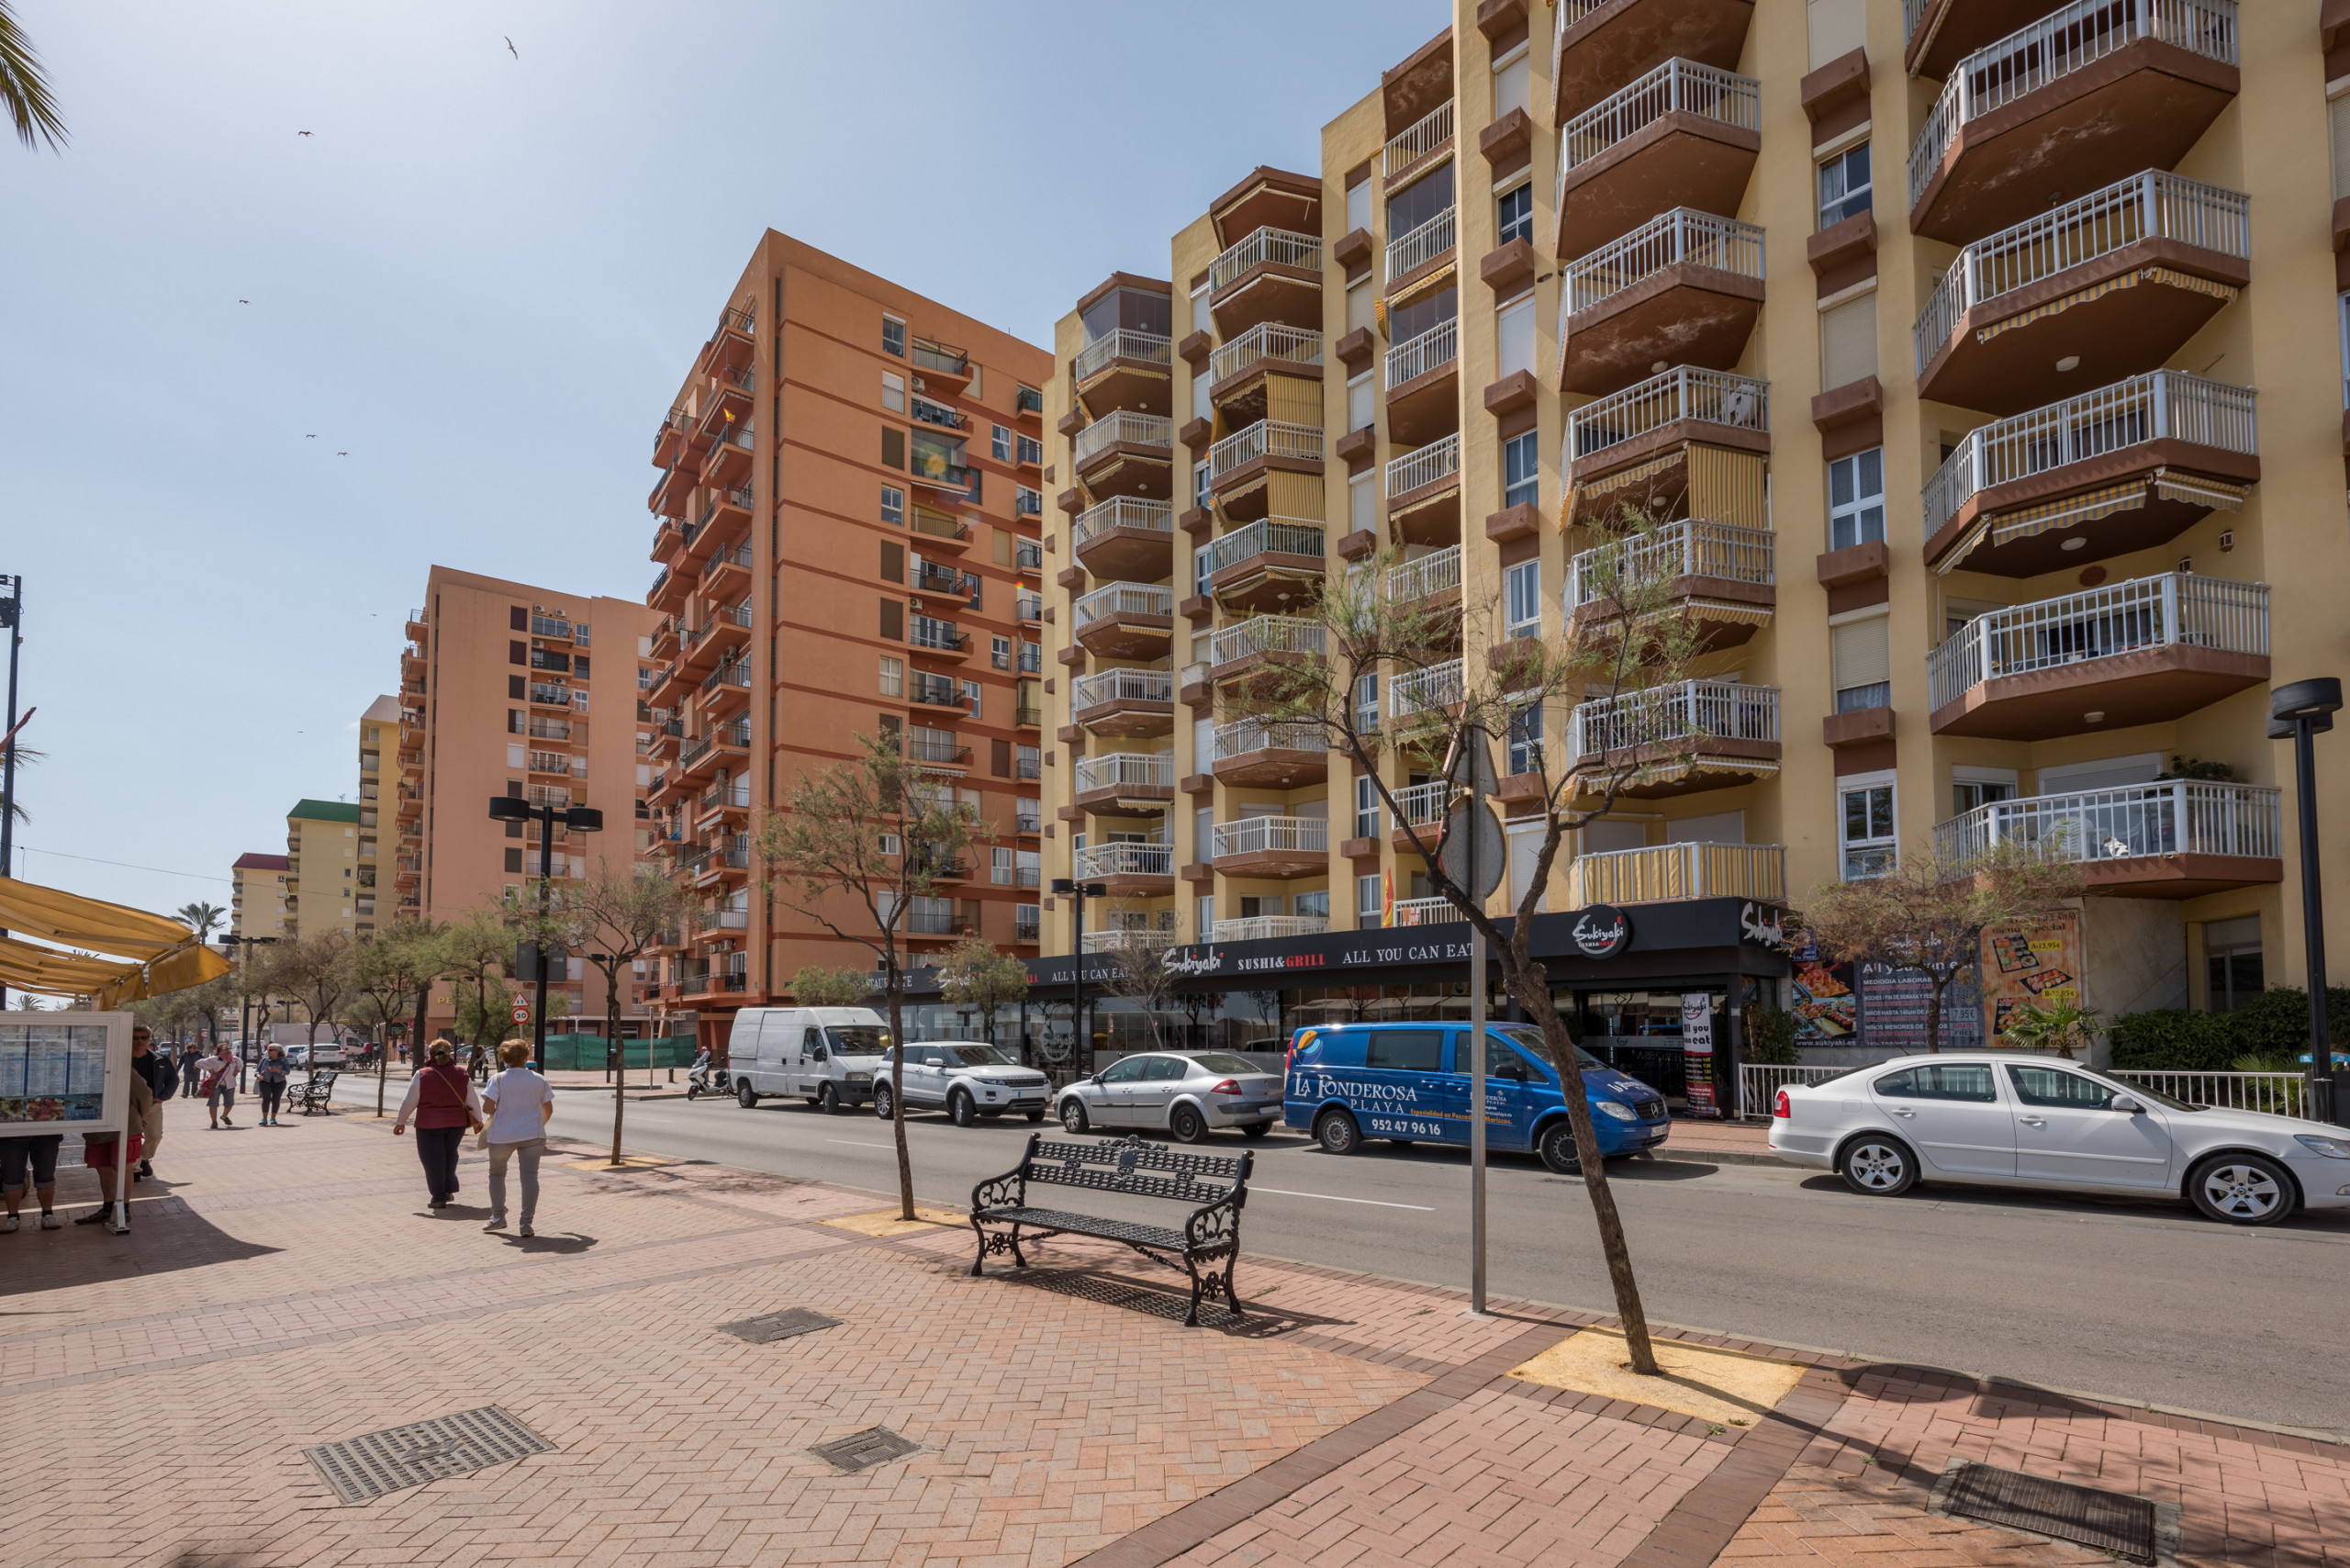 WintowinRentals Relax & Frontal Sea View Apartment in Fuengirola.